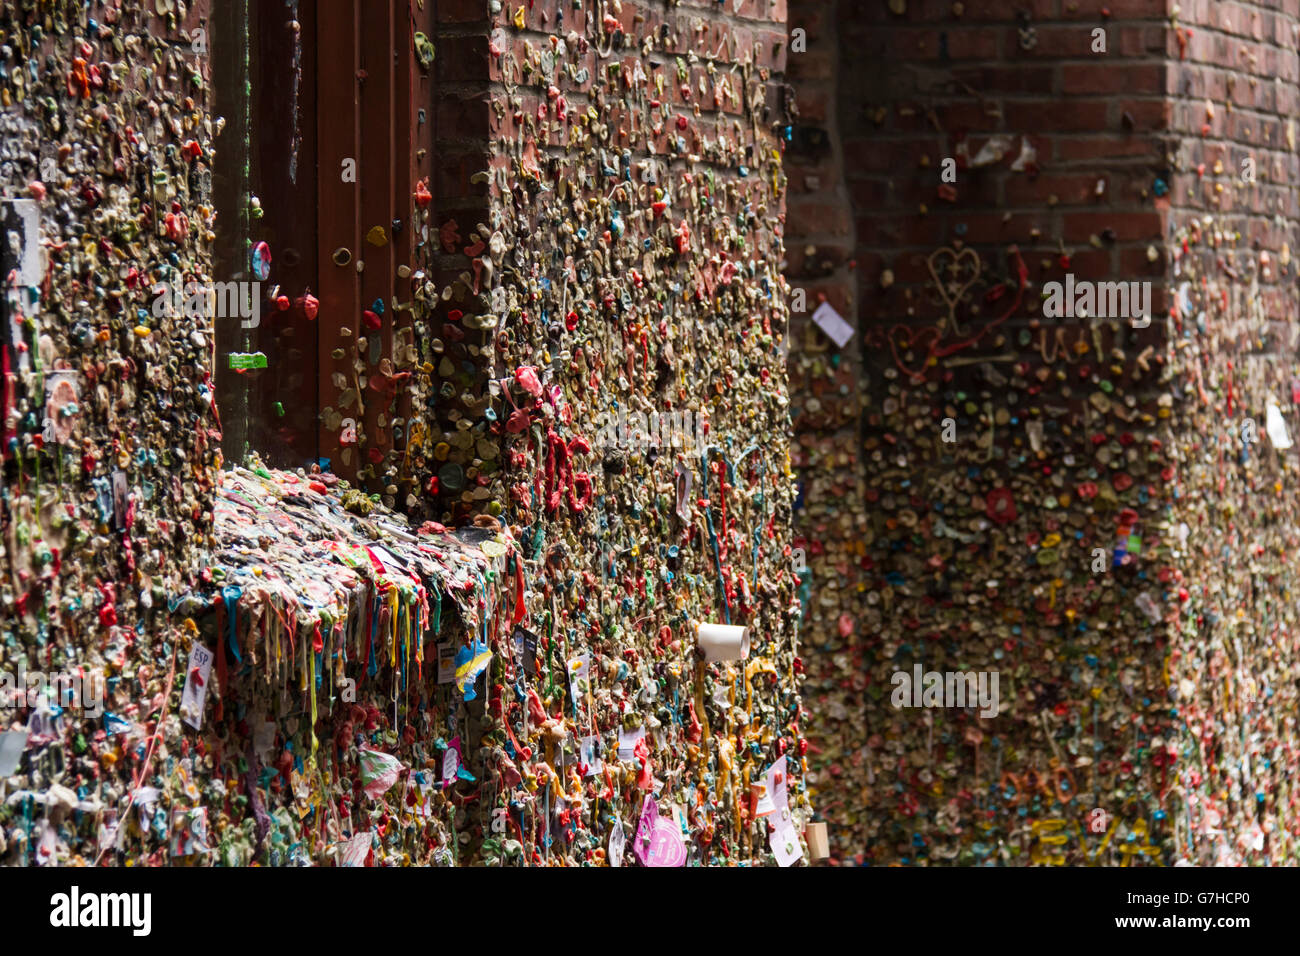 Gum alley (post alley) at the pike place market in Seattle, WA (USA). The walls are covered with multicolored chewing gums. Stock Photo